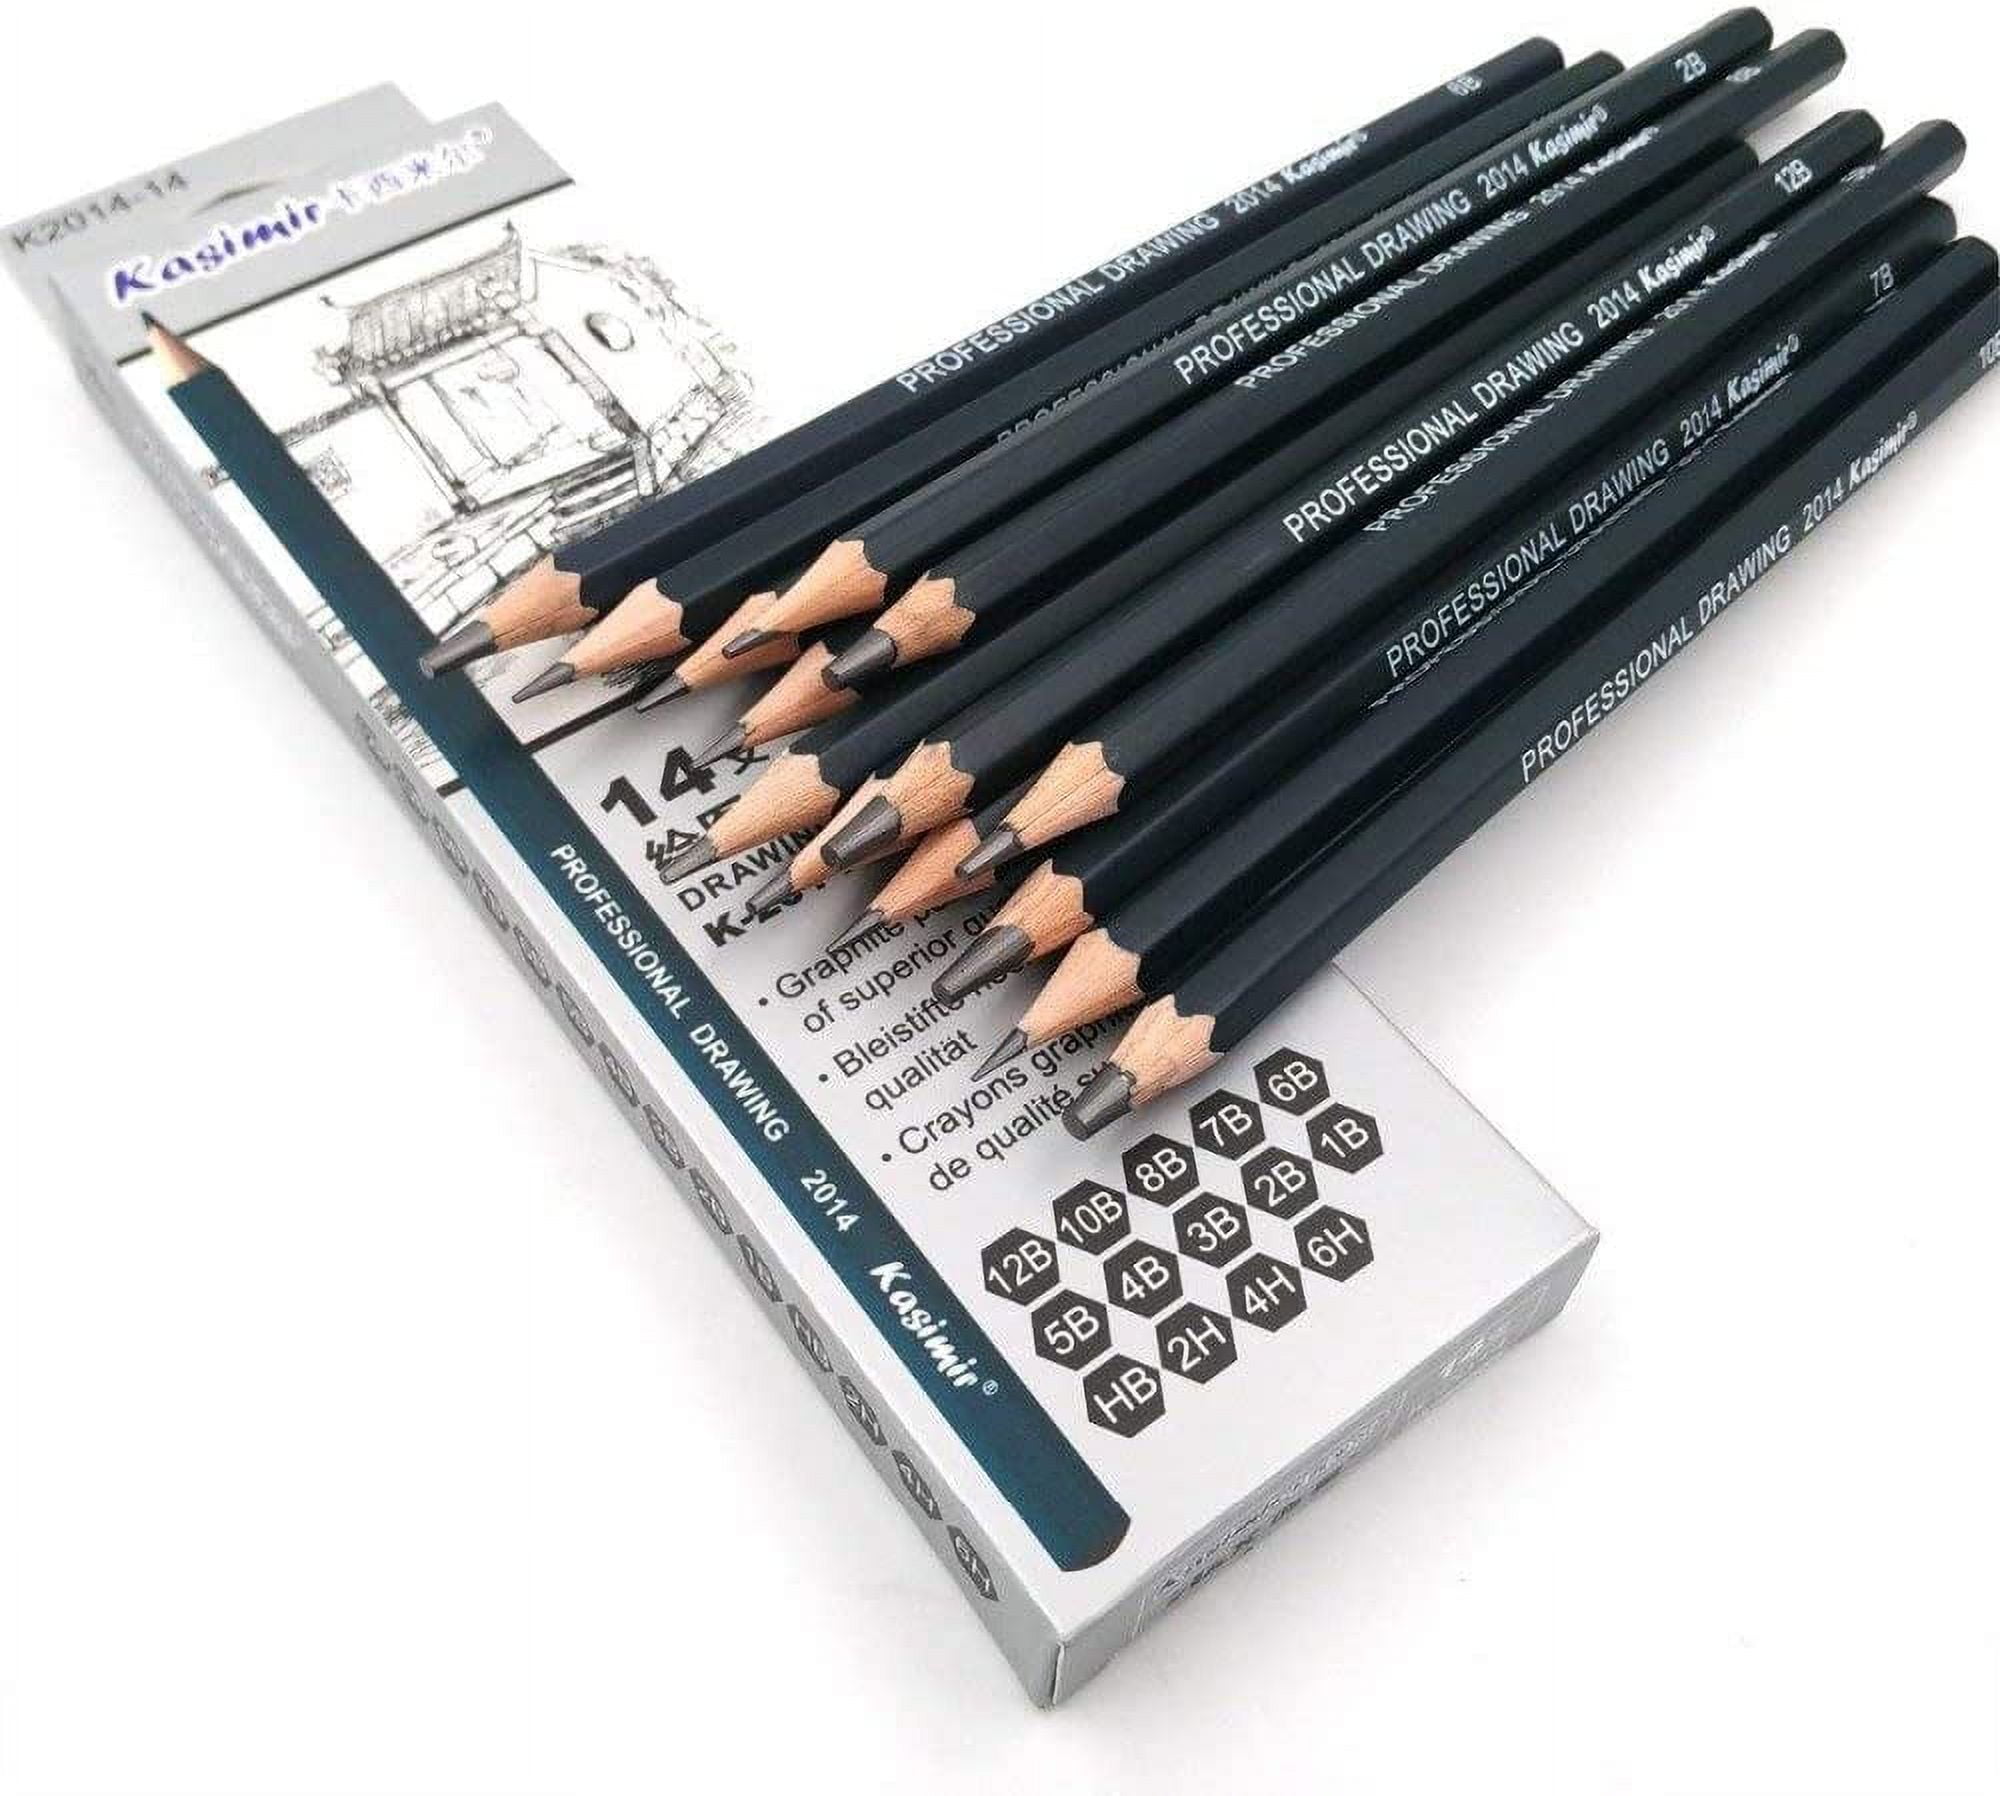 BIANYO CHARCOAL PENCIL SET : 12 PIECES FROM BLACK TO BROWN GRADIENT –  Magnifico Beaux Arts